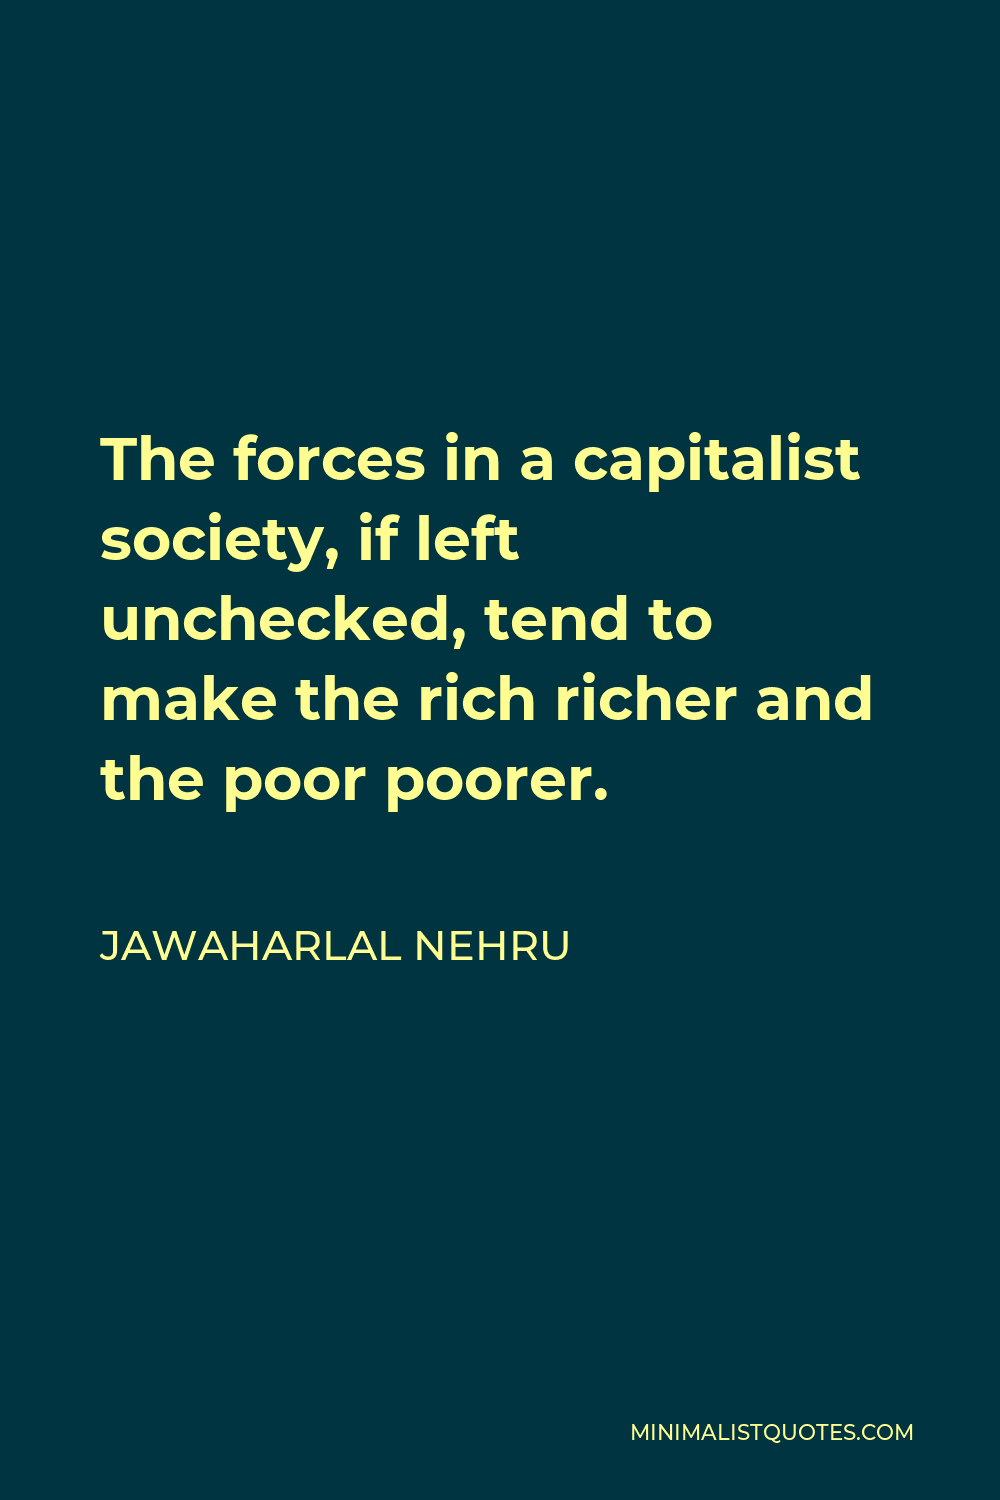 Jawaharlal Nehru Quote - The forces in a capitalist society, if left unchecked, tend to make the rich richer and the poor poorer.